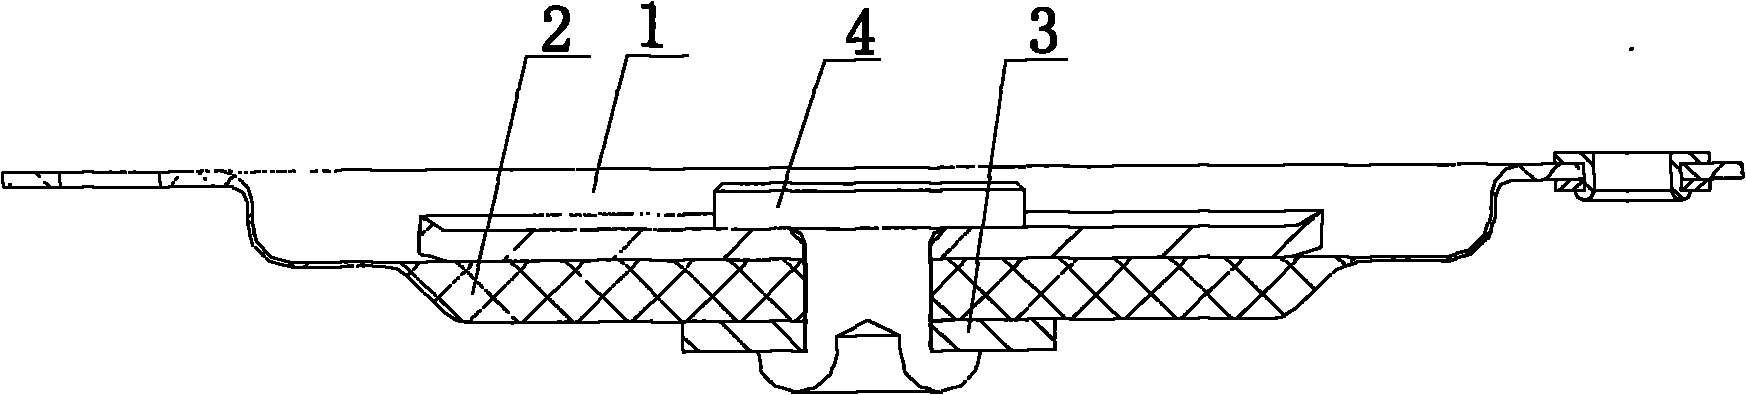 Diaphragm structure used for pulse valve